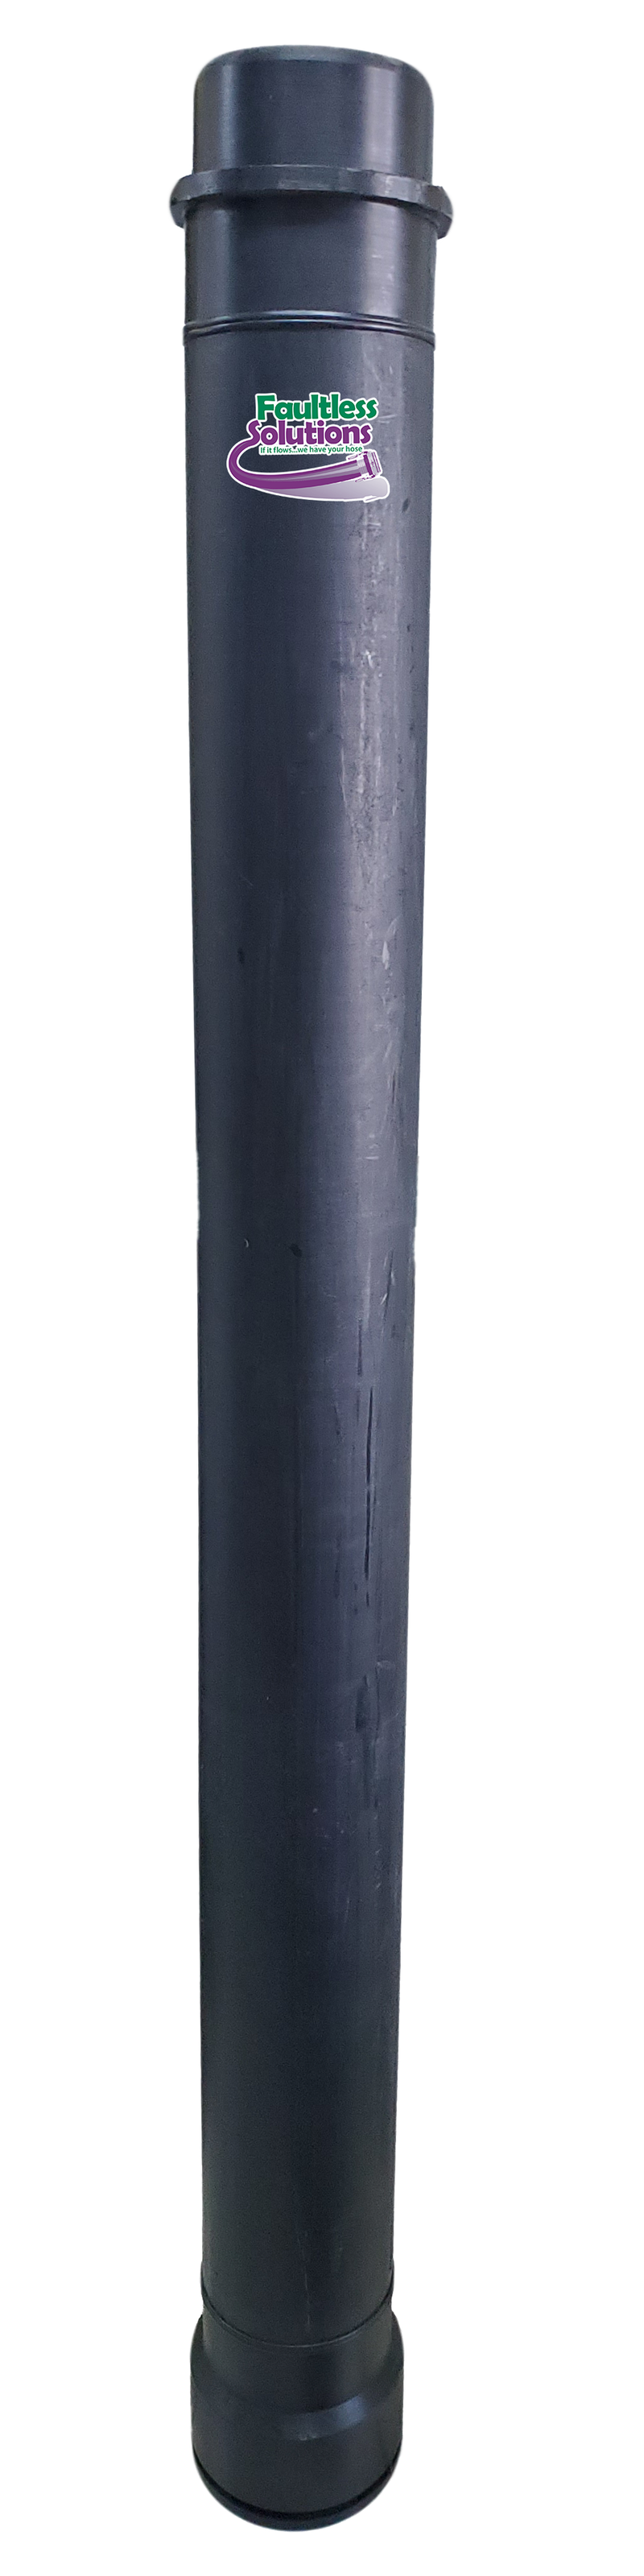 HDPE Polyethylene Plastic Dig Tube/Pipe for Hydro-Excavation